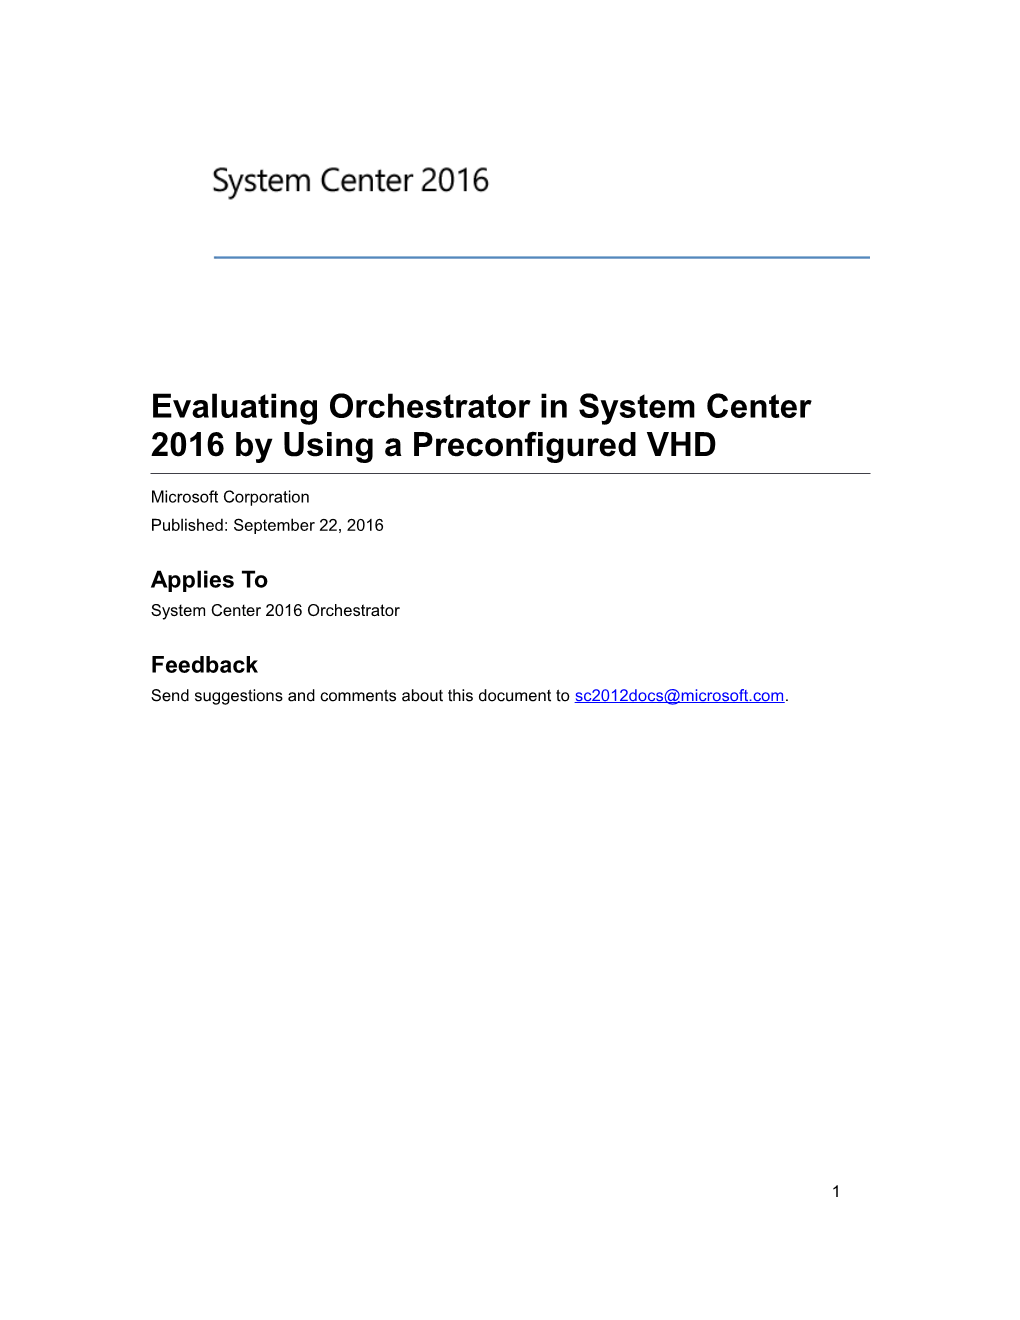 Evaluating Orchestrator in System Center 2016 by Using a Preconfigured VHD